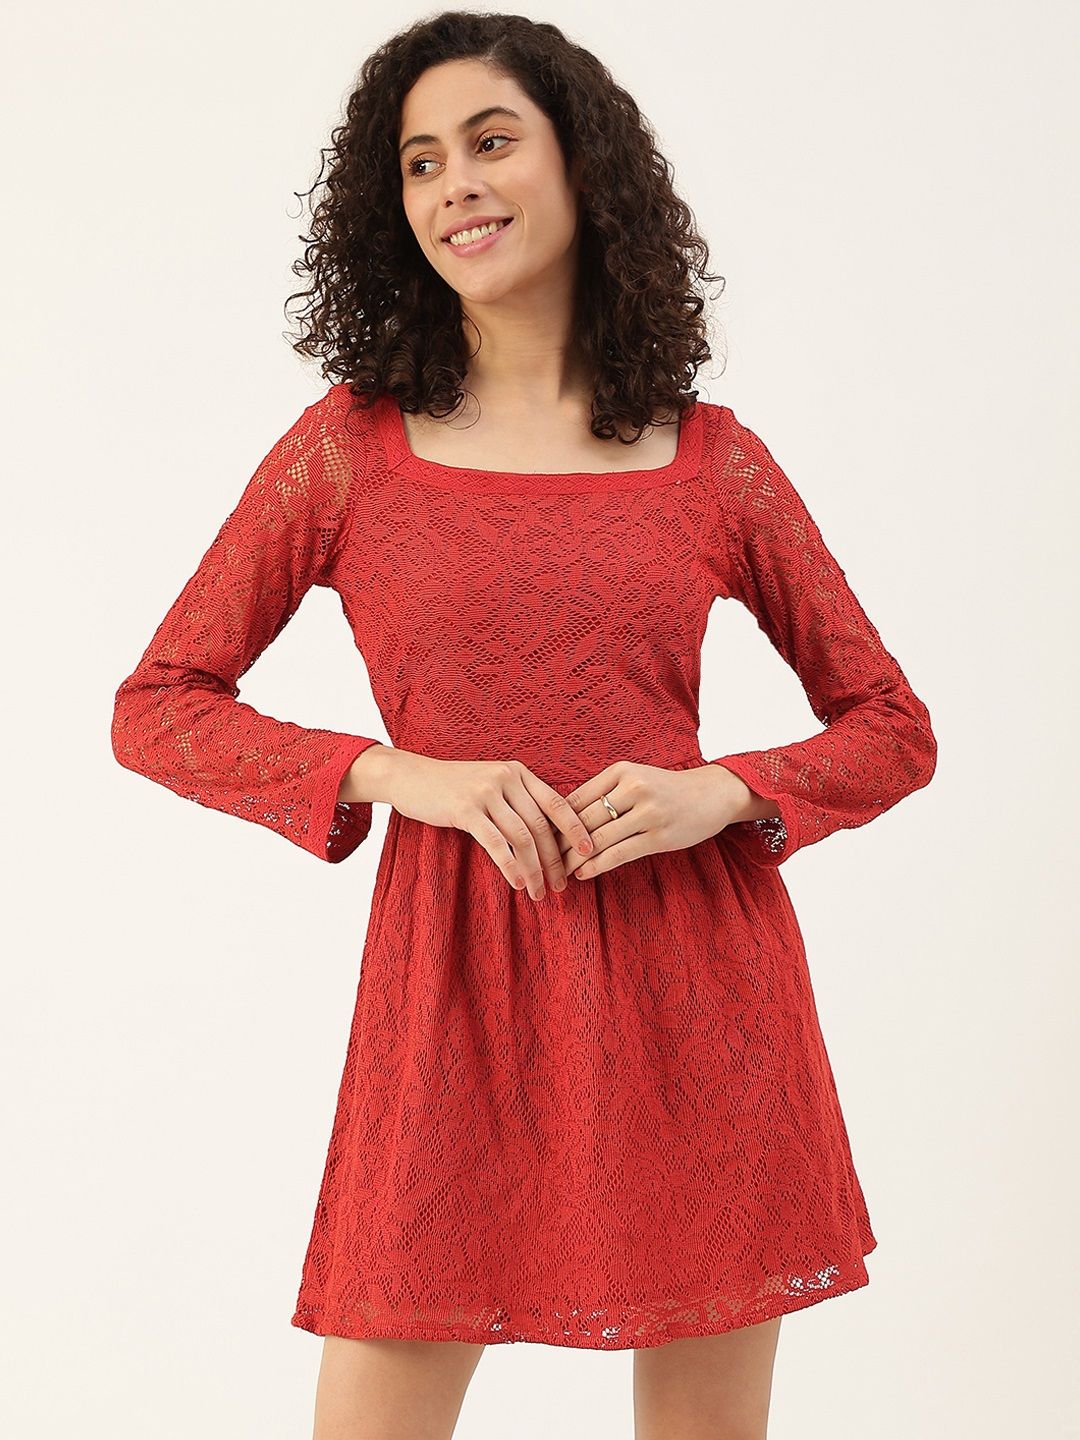 Maaesa Women Red Lace Belted A-Line Dress Price in India